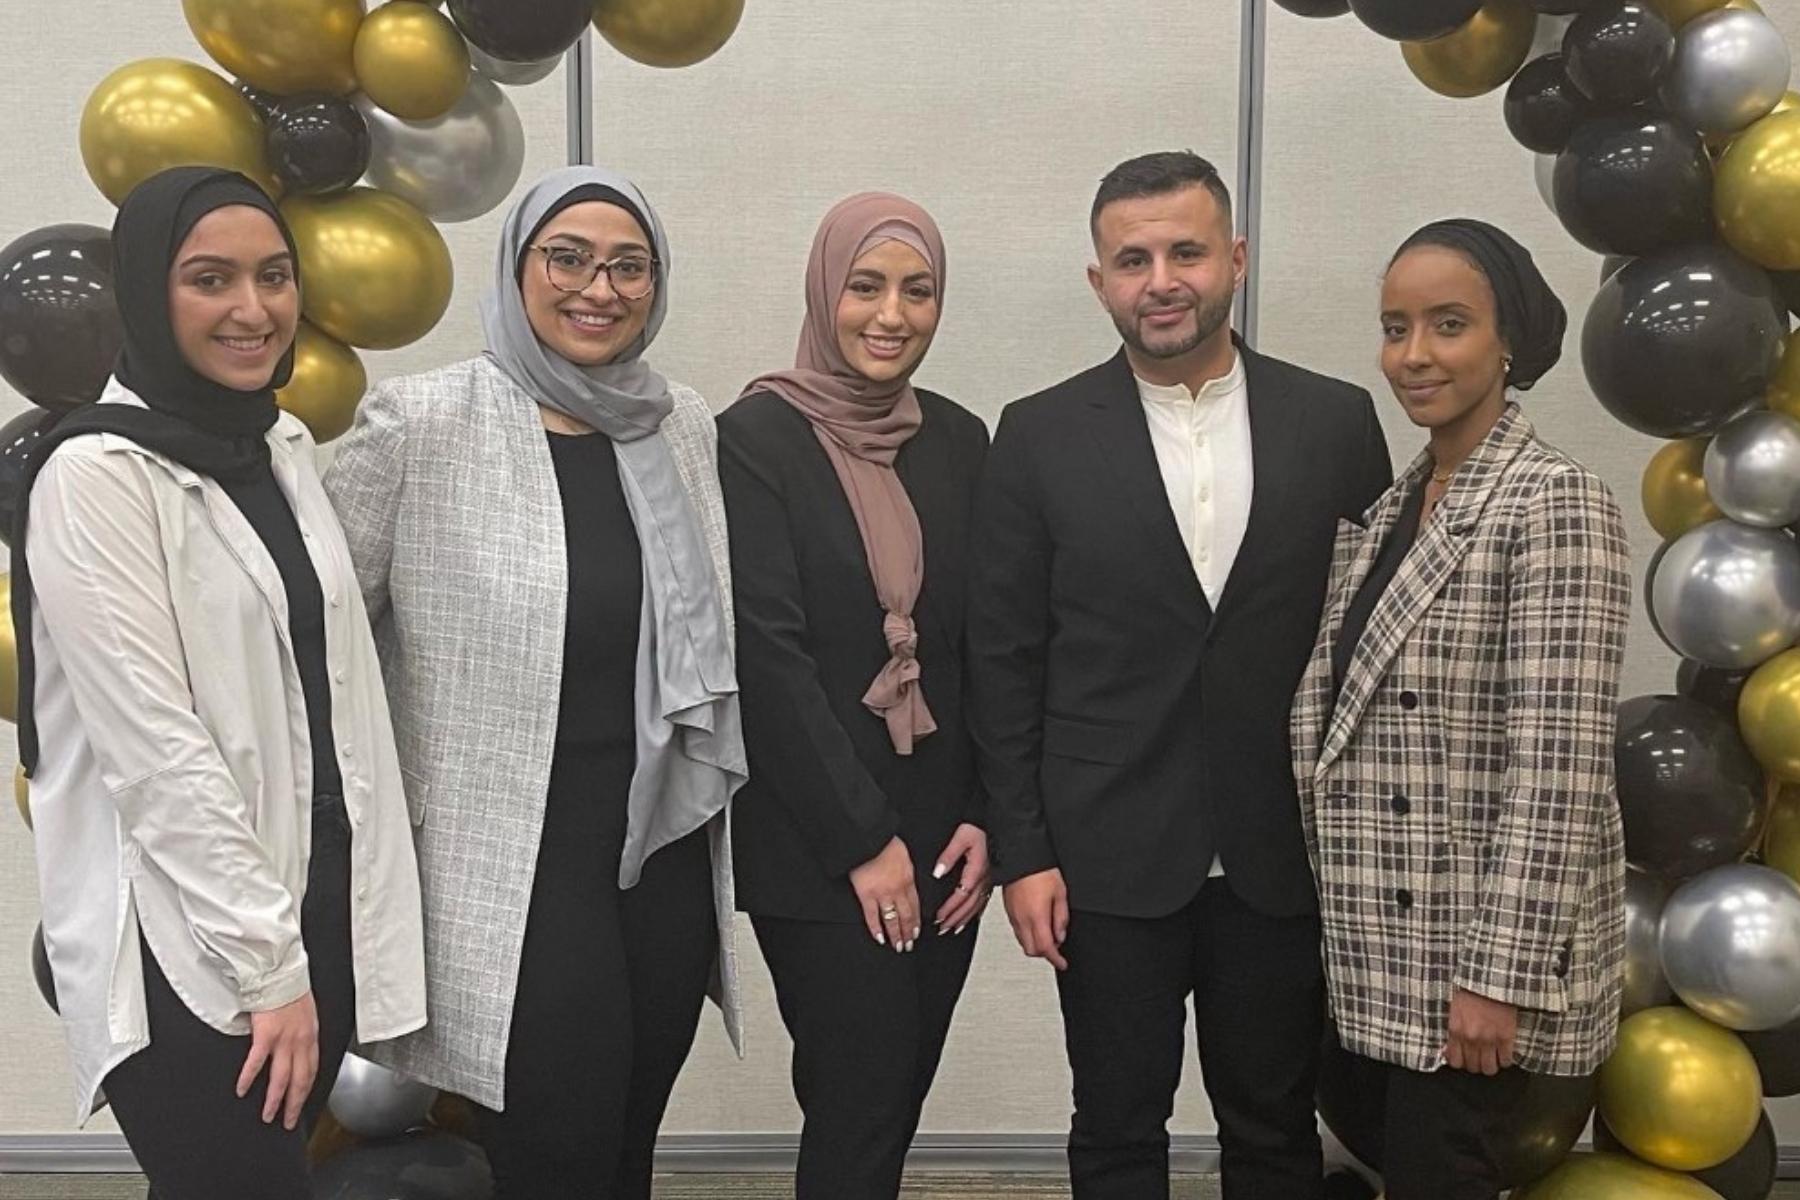 MLSA Iftar organizers pose for a photo in front of a balloon arch